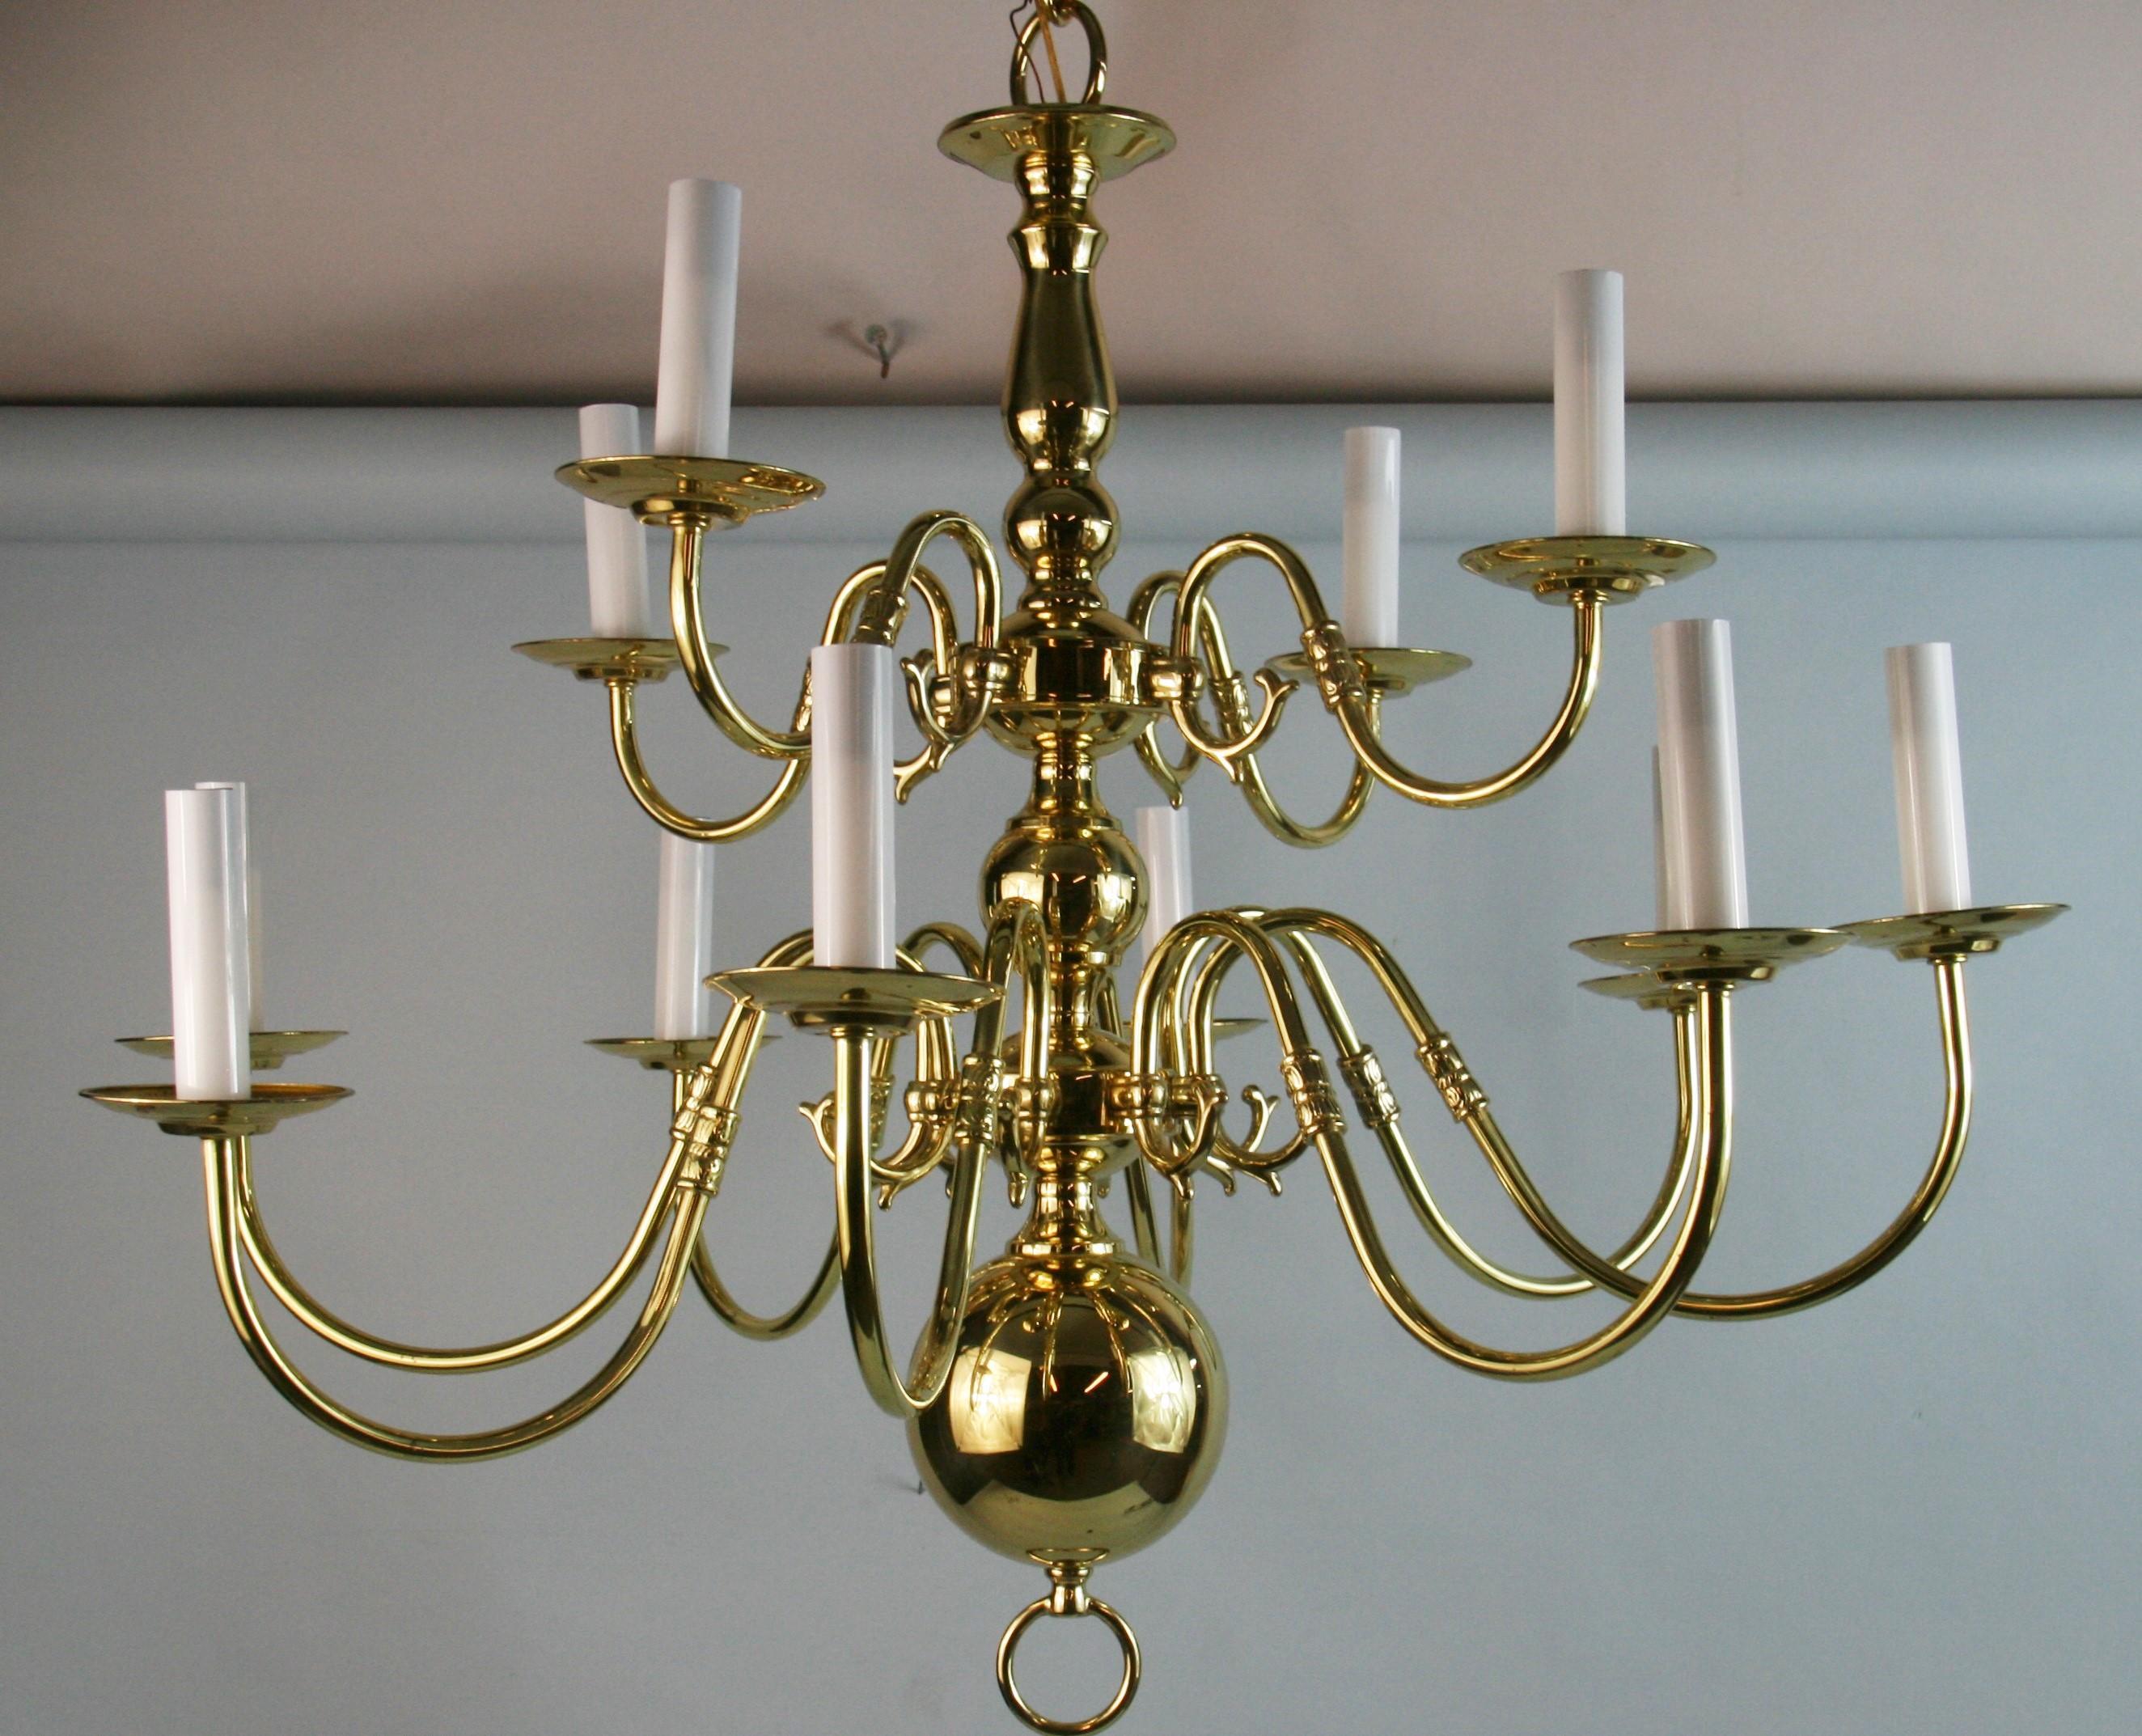 1561  Solid polished brass 12 light Flemish style chandelier
Supplied with 36